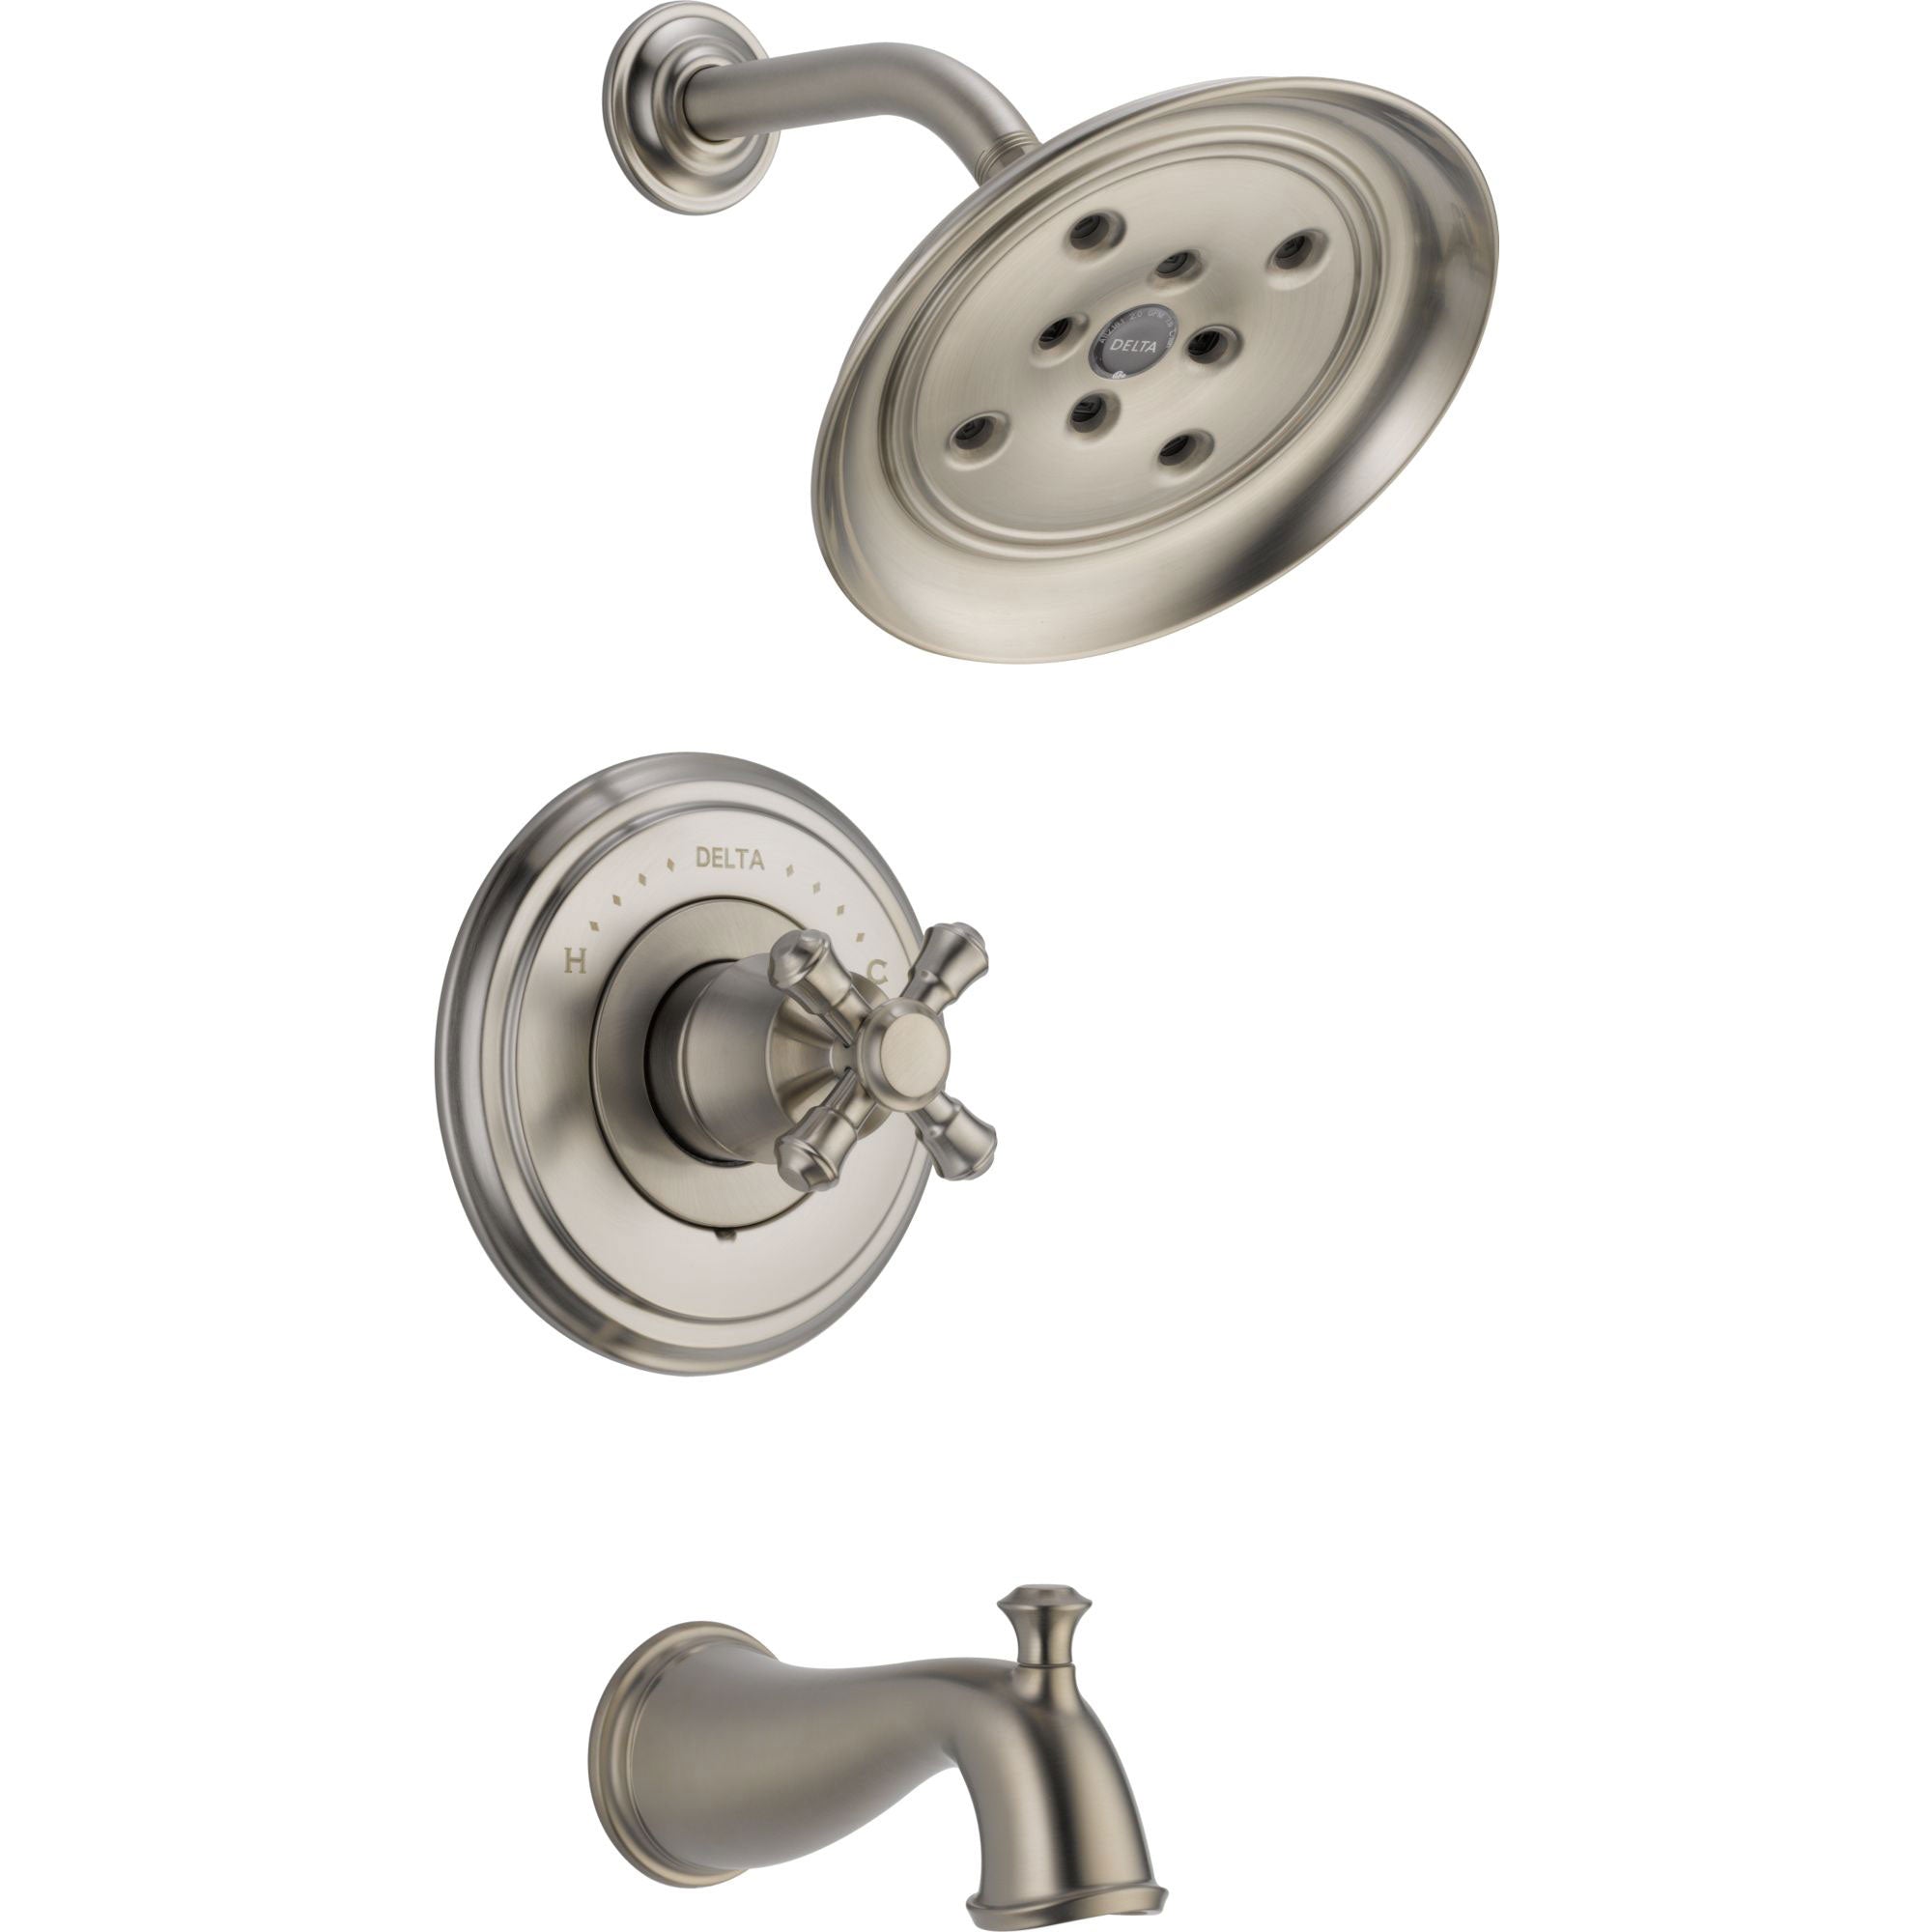 Delta Cassidy Stainless Steel Finish 14 Series Tub and Shower Combination Faucet INCLUDES Rough-in Valve and Single Cross Handle D1158V